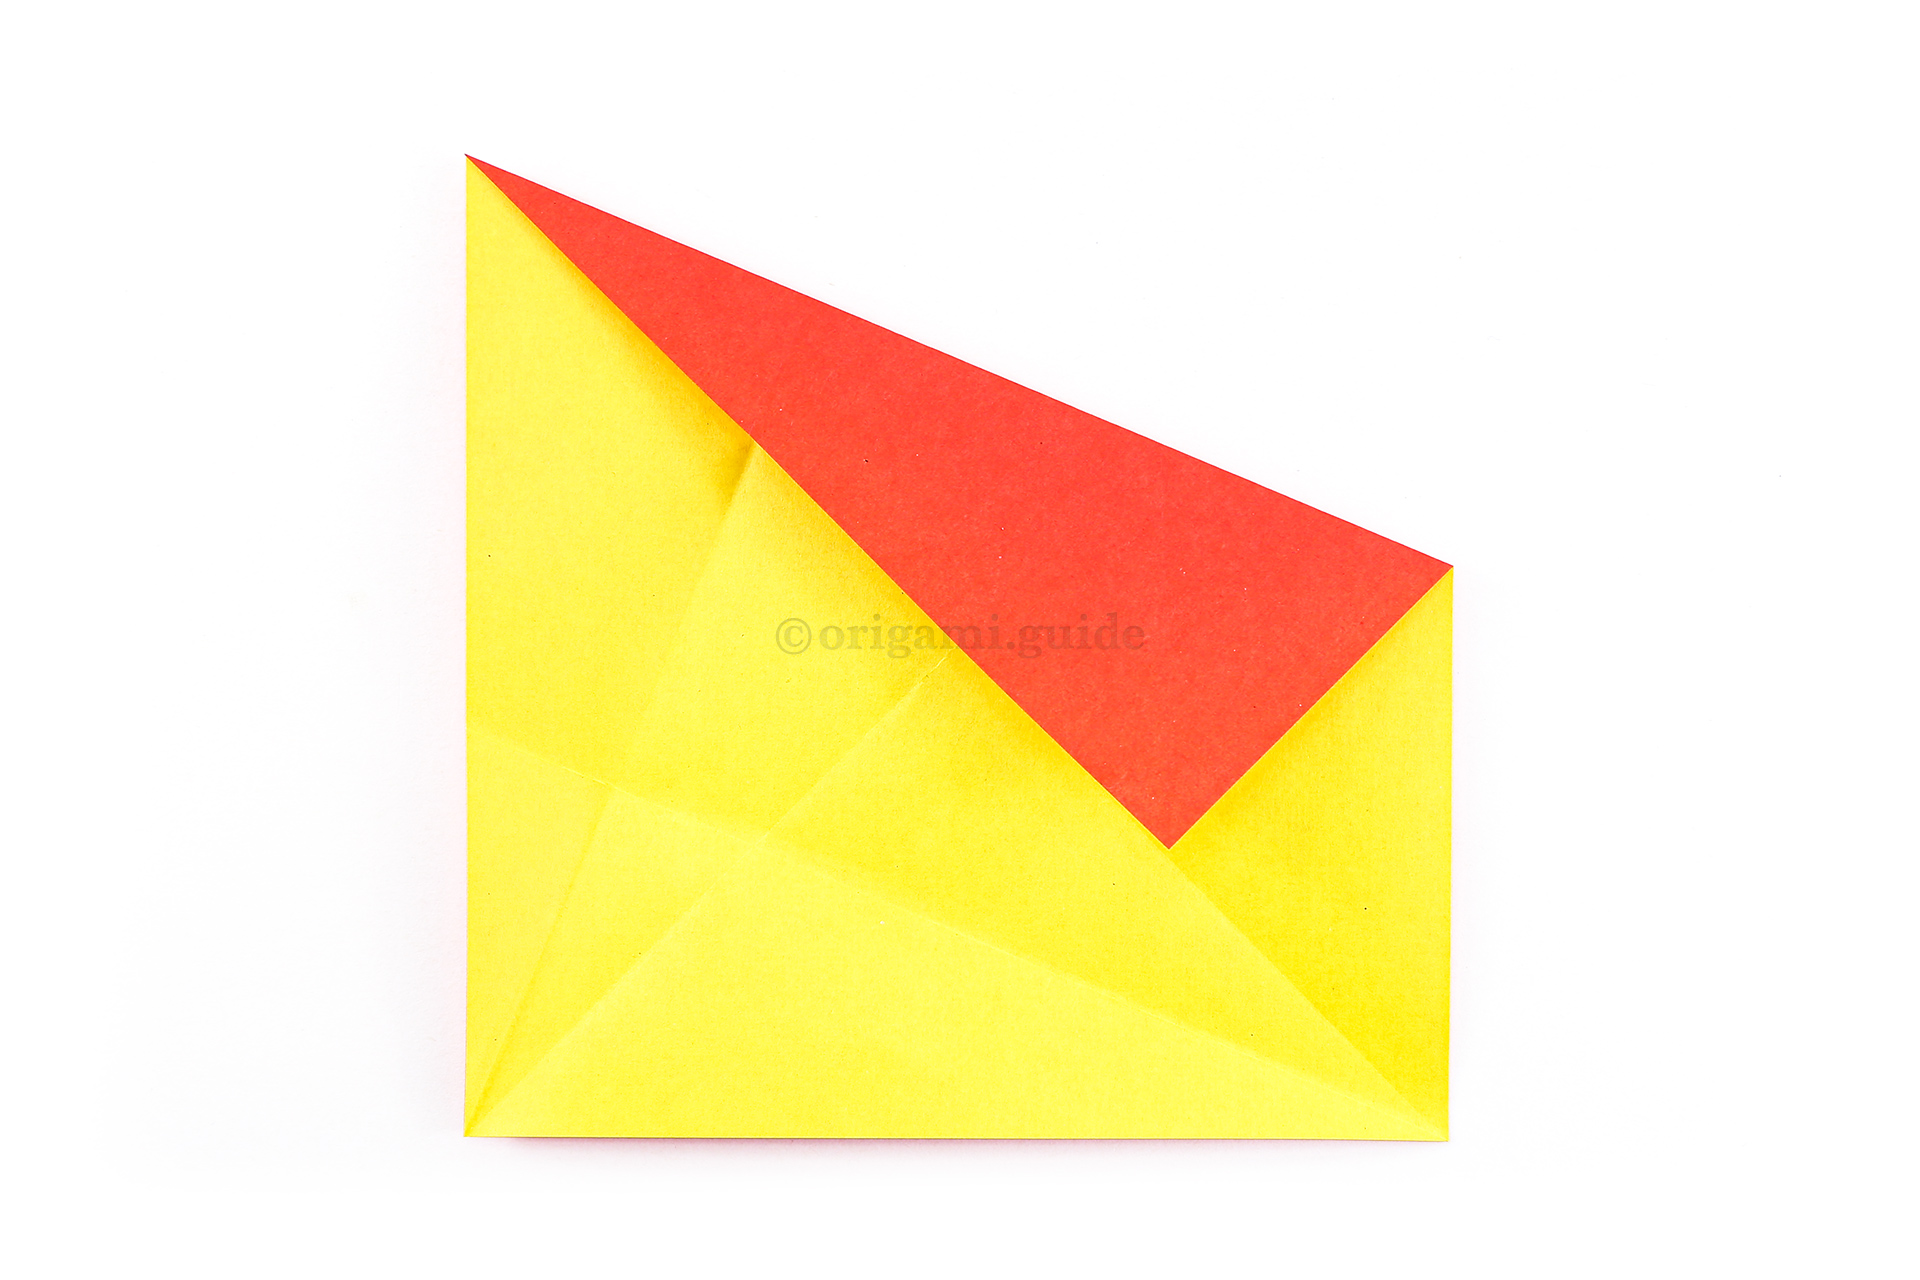 Fold the top right corner diagonally down to align with the central diagonal crease.